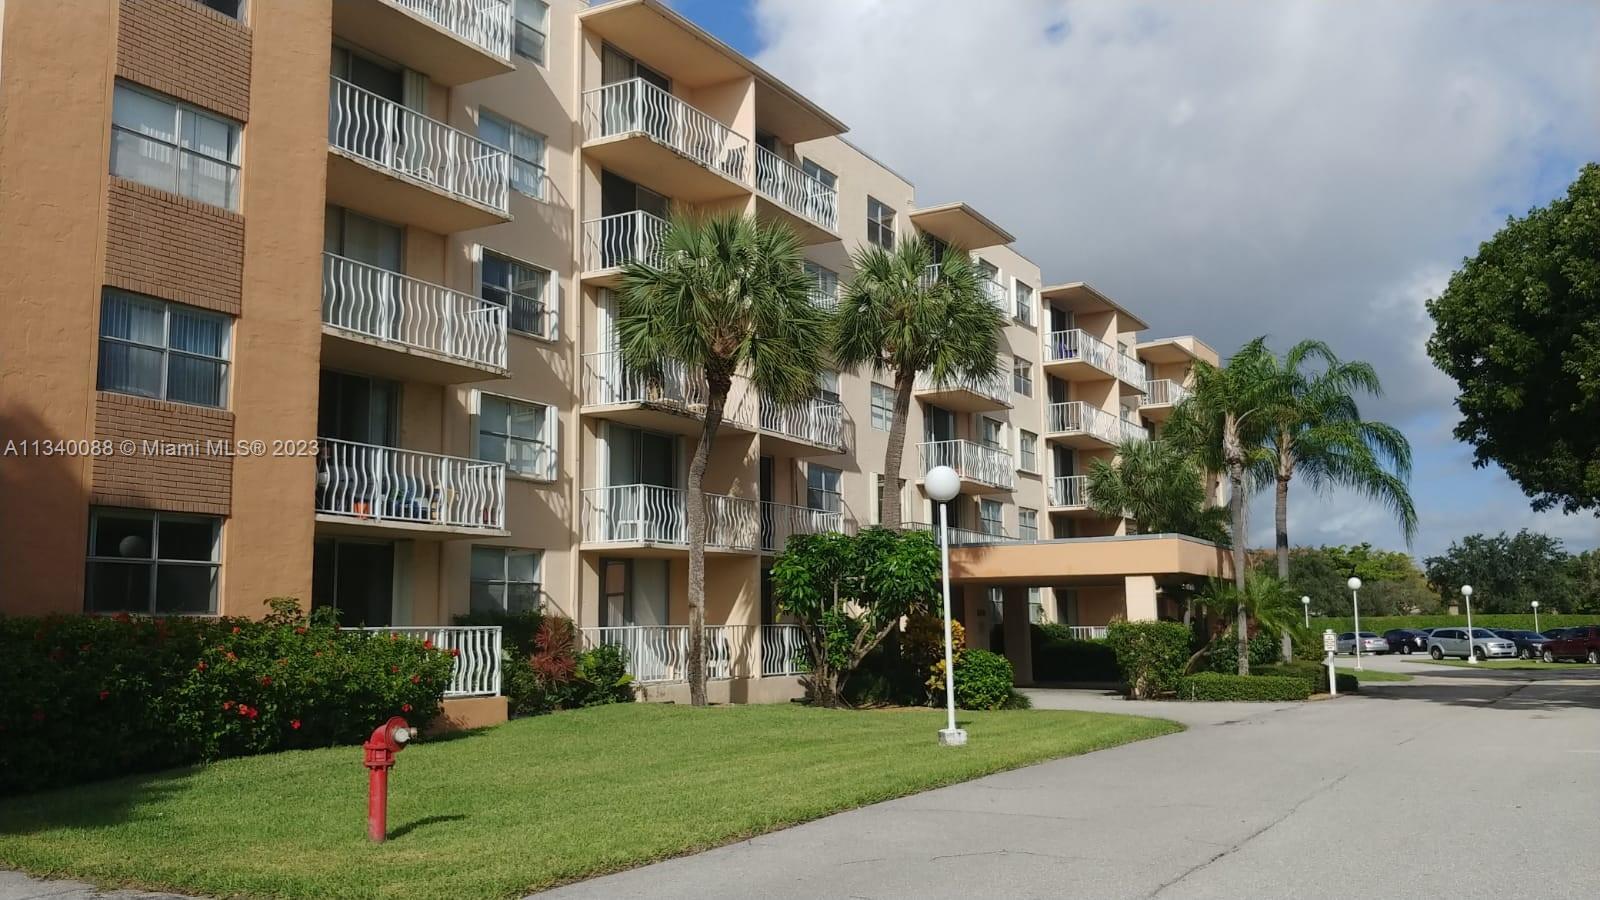 GREAT UNIT IN AWESOME AREA OF PALM BEACH, JUST 1.3 MILES FROM PALM BEACH OUTLETS, SUPER-TARGET, REST